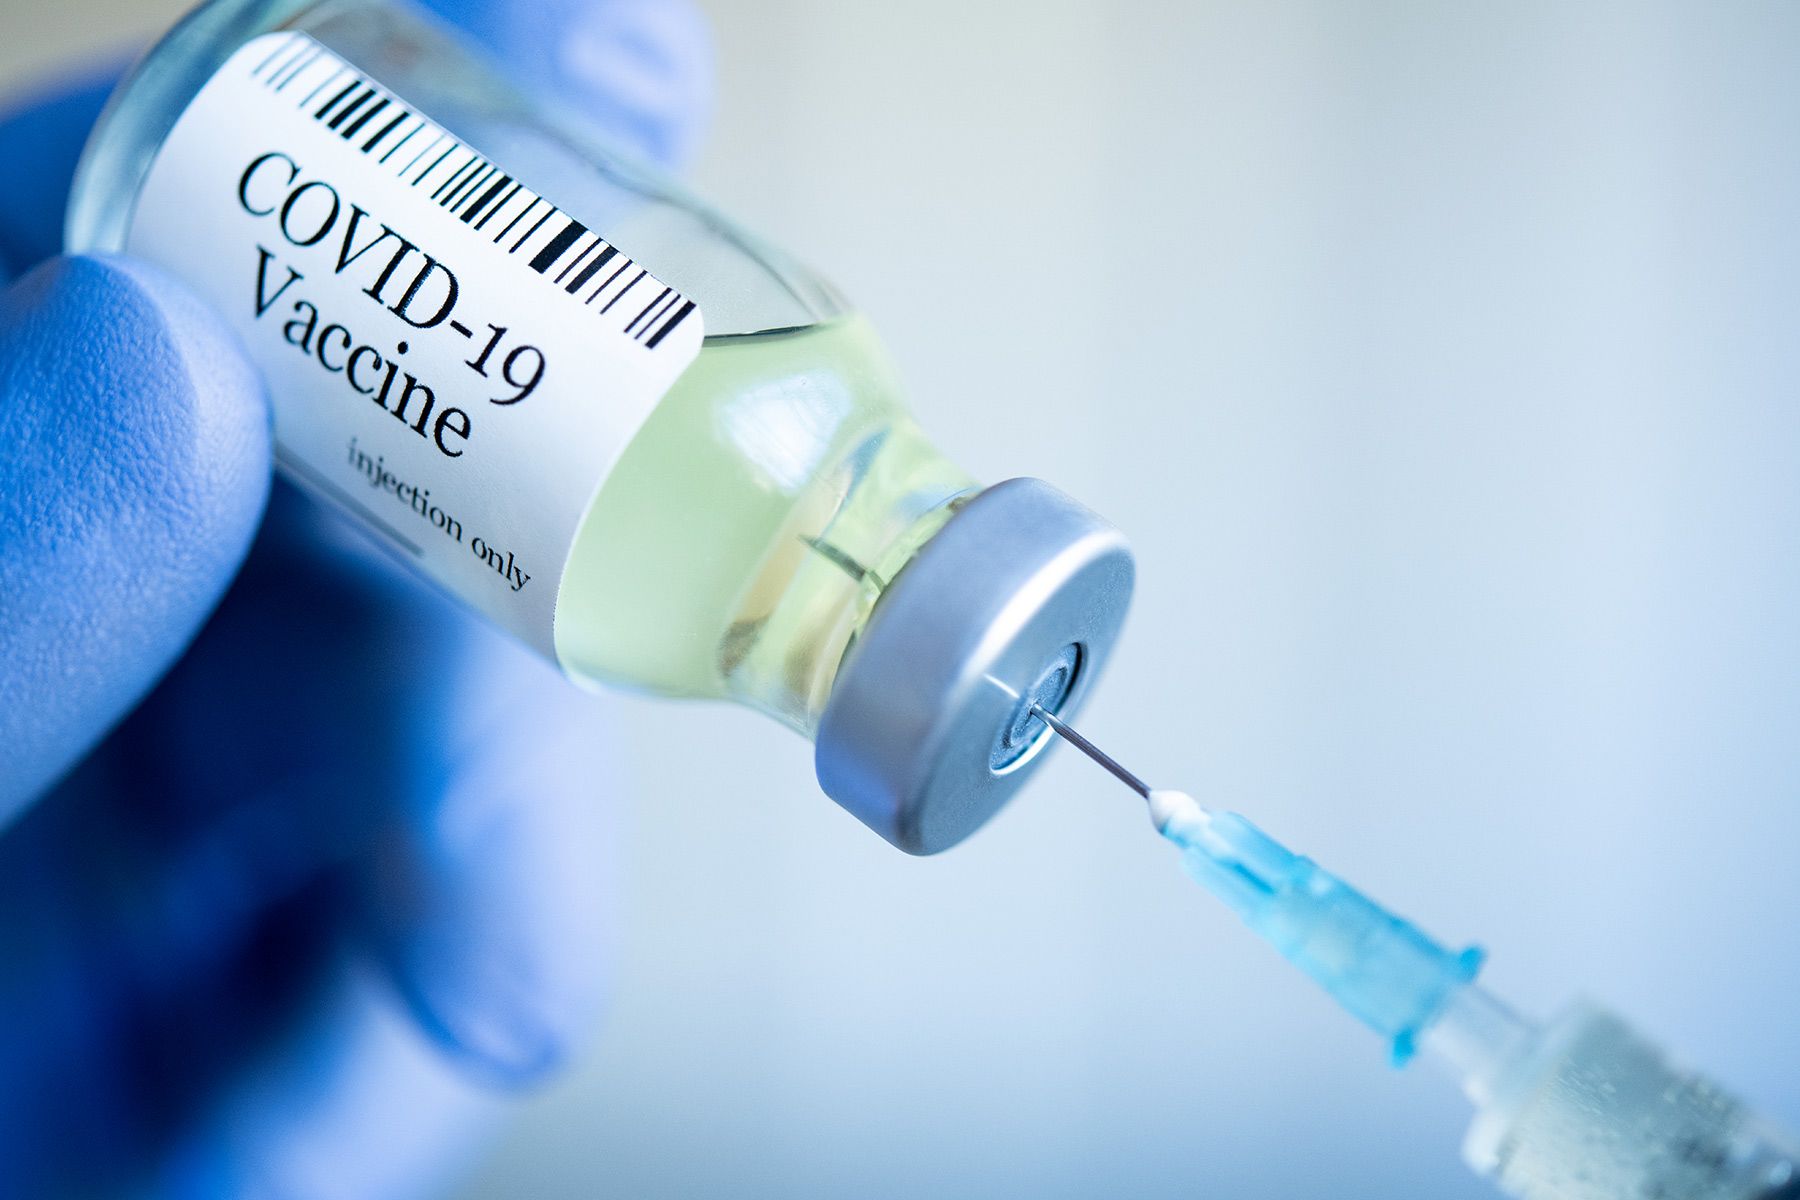 Hospital Workers Fired, Resign Over Vaccine Policy